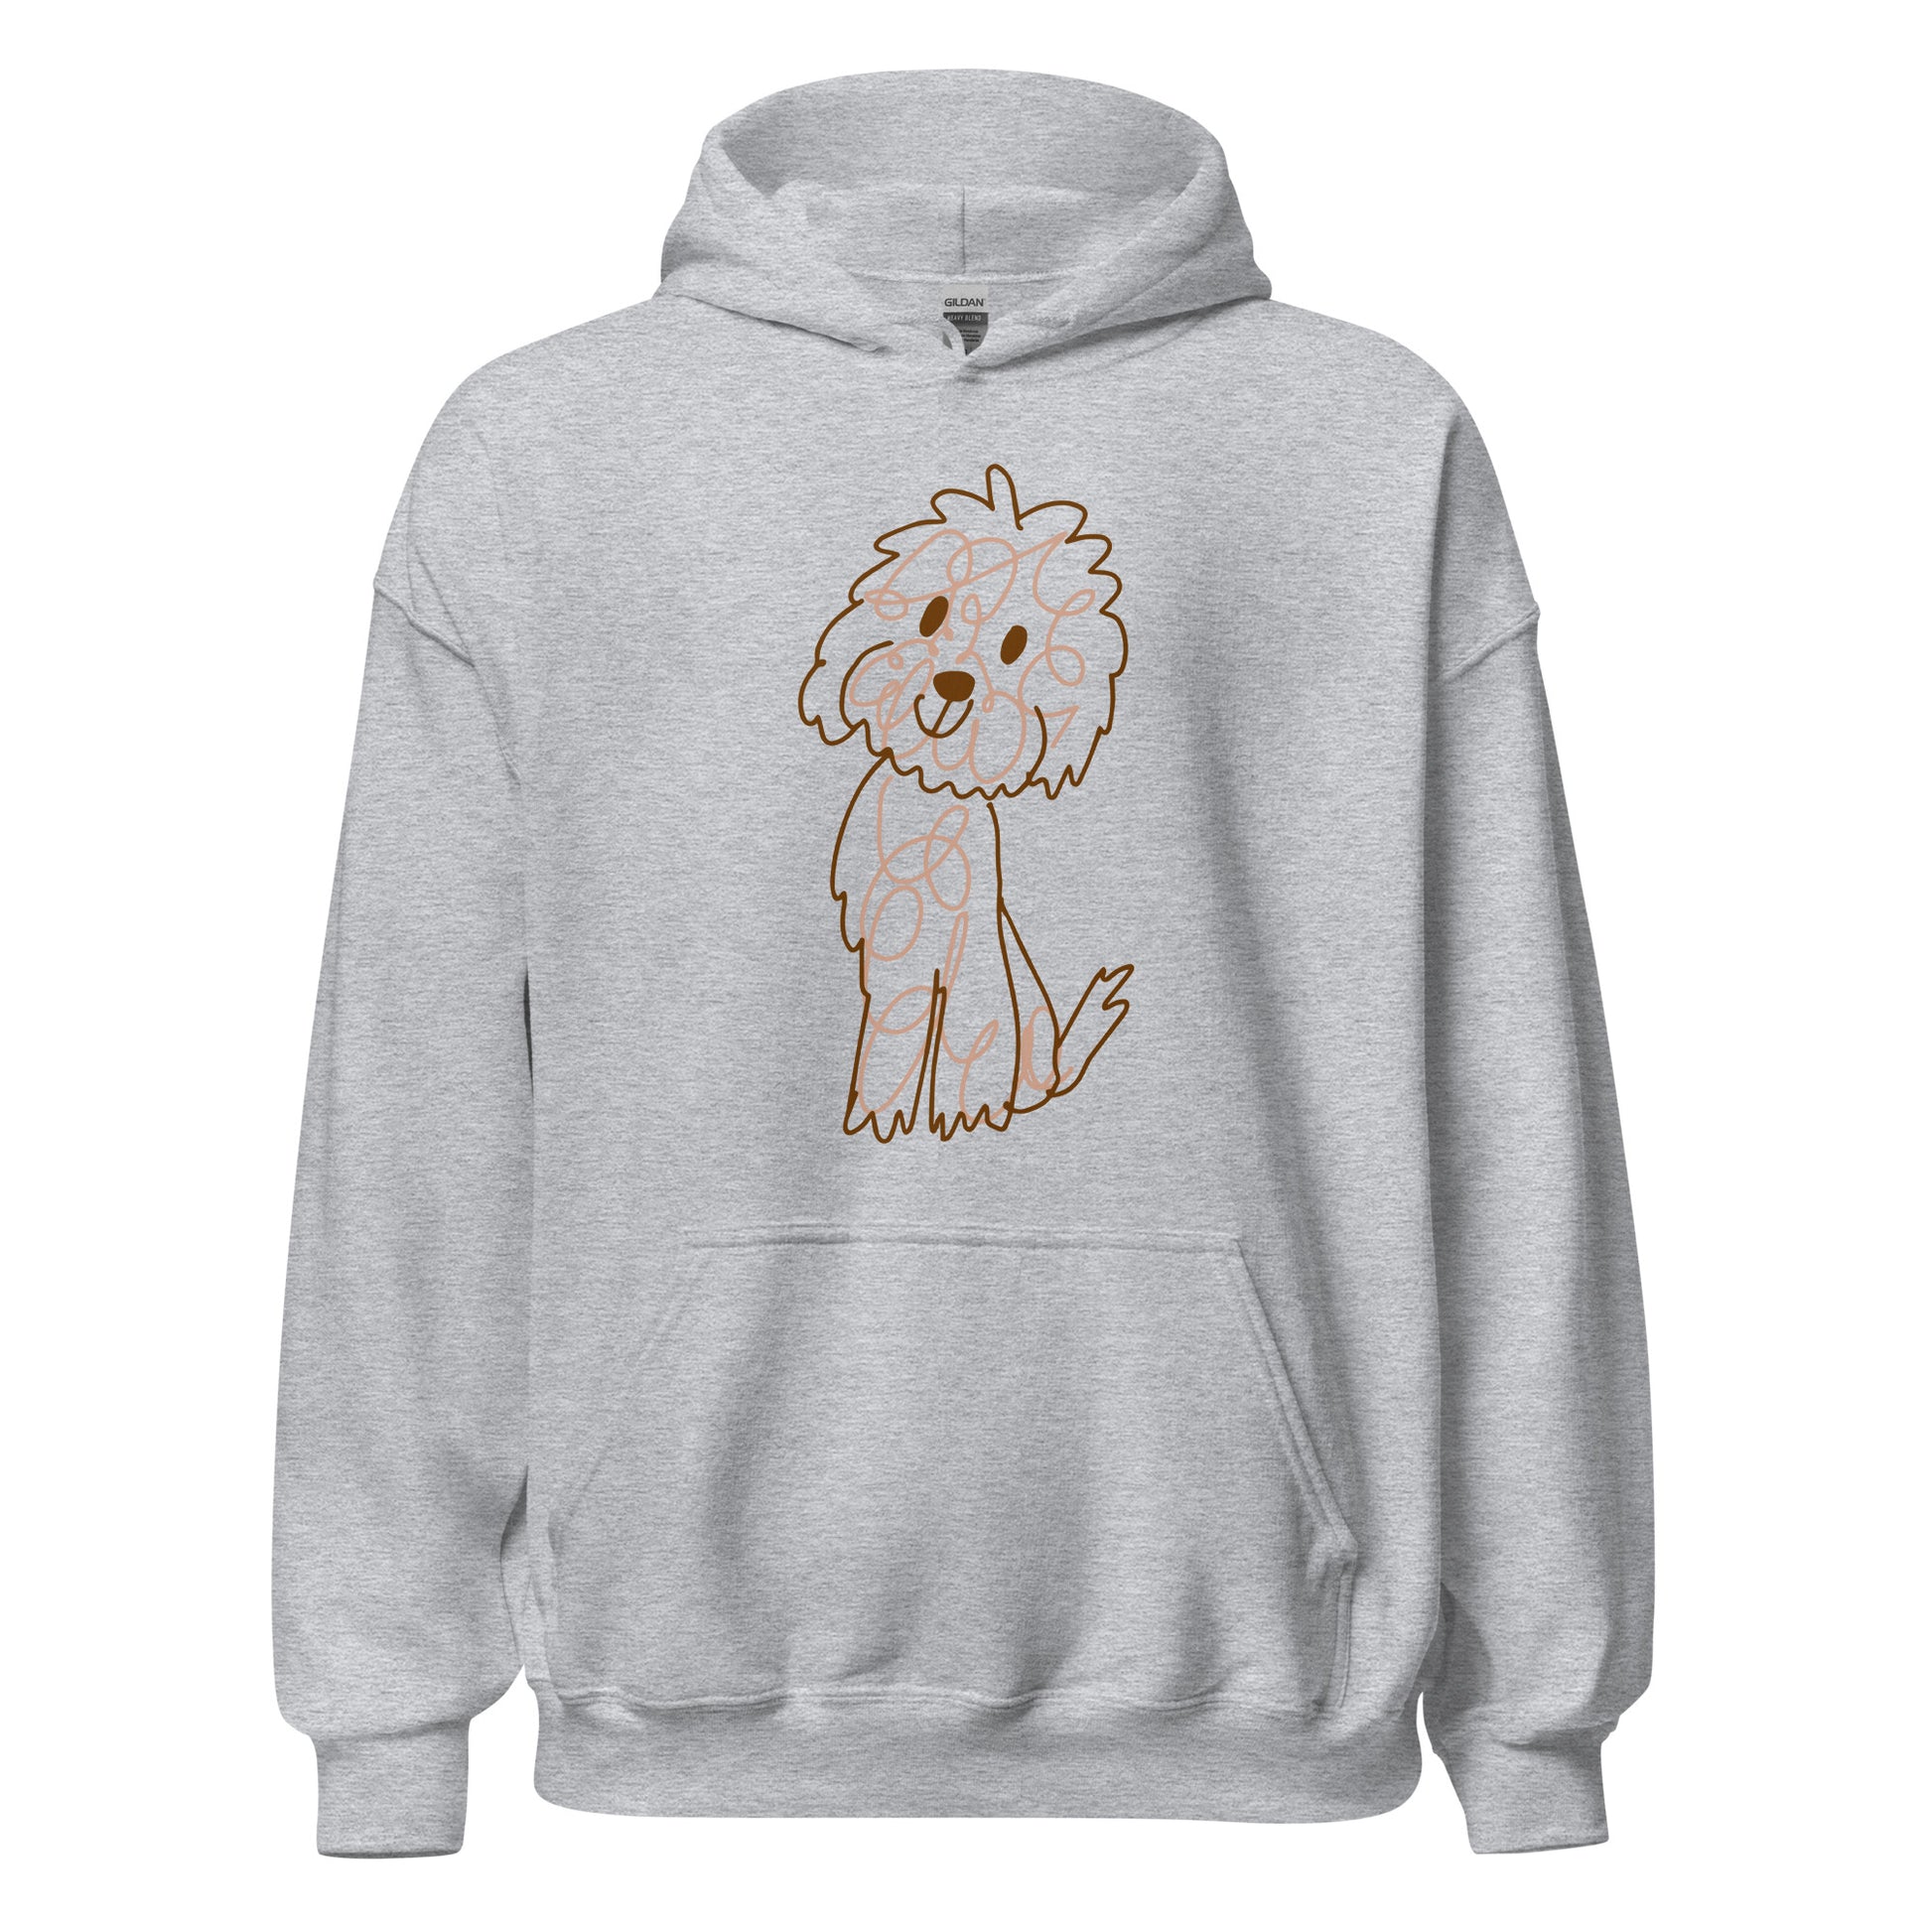 Hoodie with doodle dog drawn with fine lines gray color